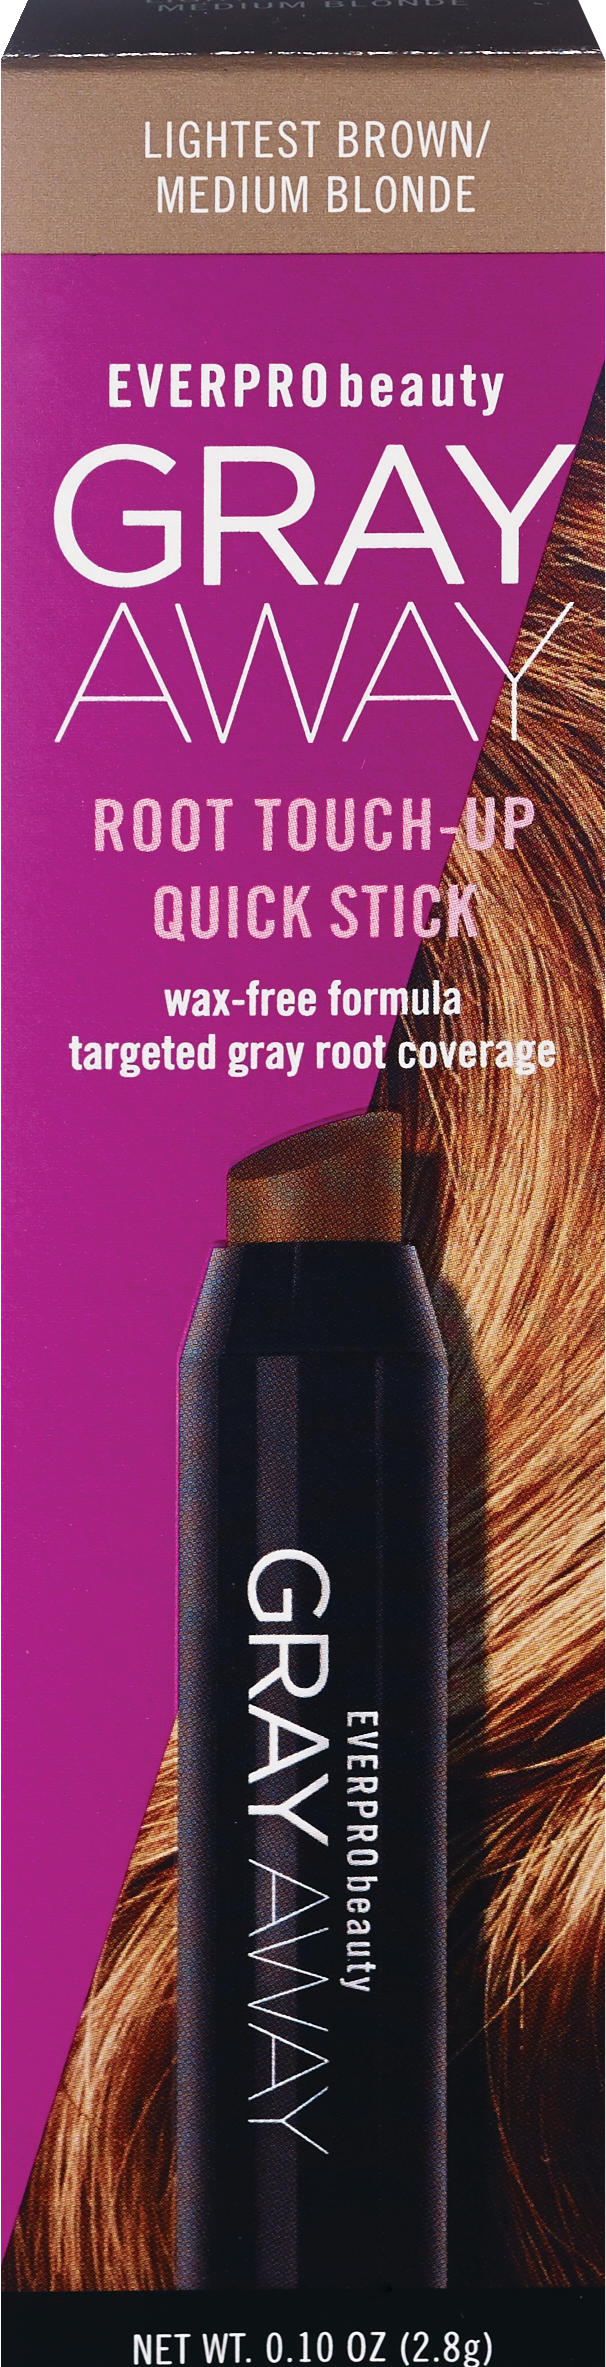 Everpro Beauty Gray Away Root Touch-up Quick Stick - Tinte temporal para raíces, Black/Dark Brown